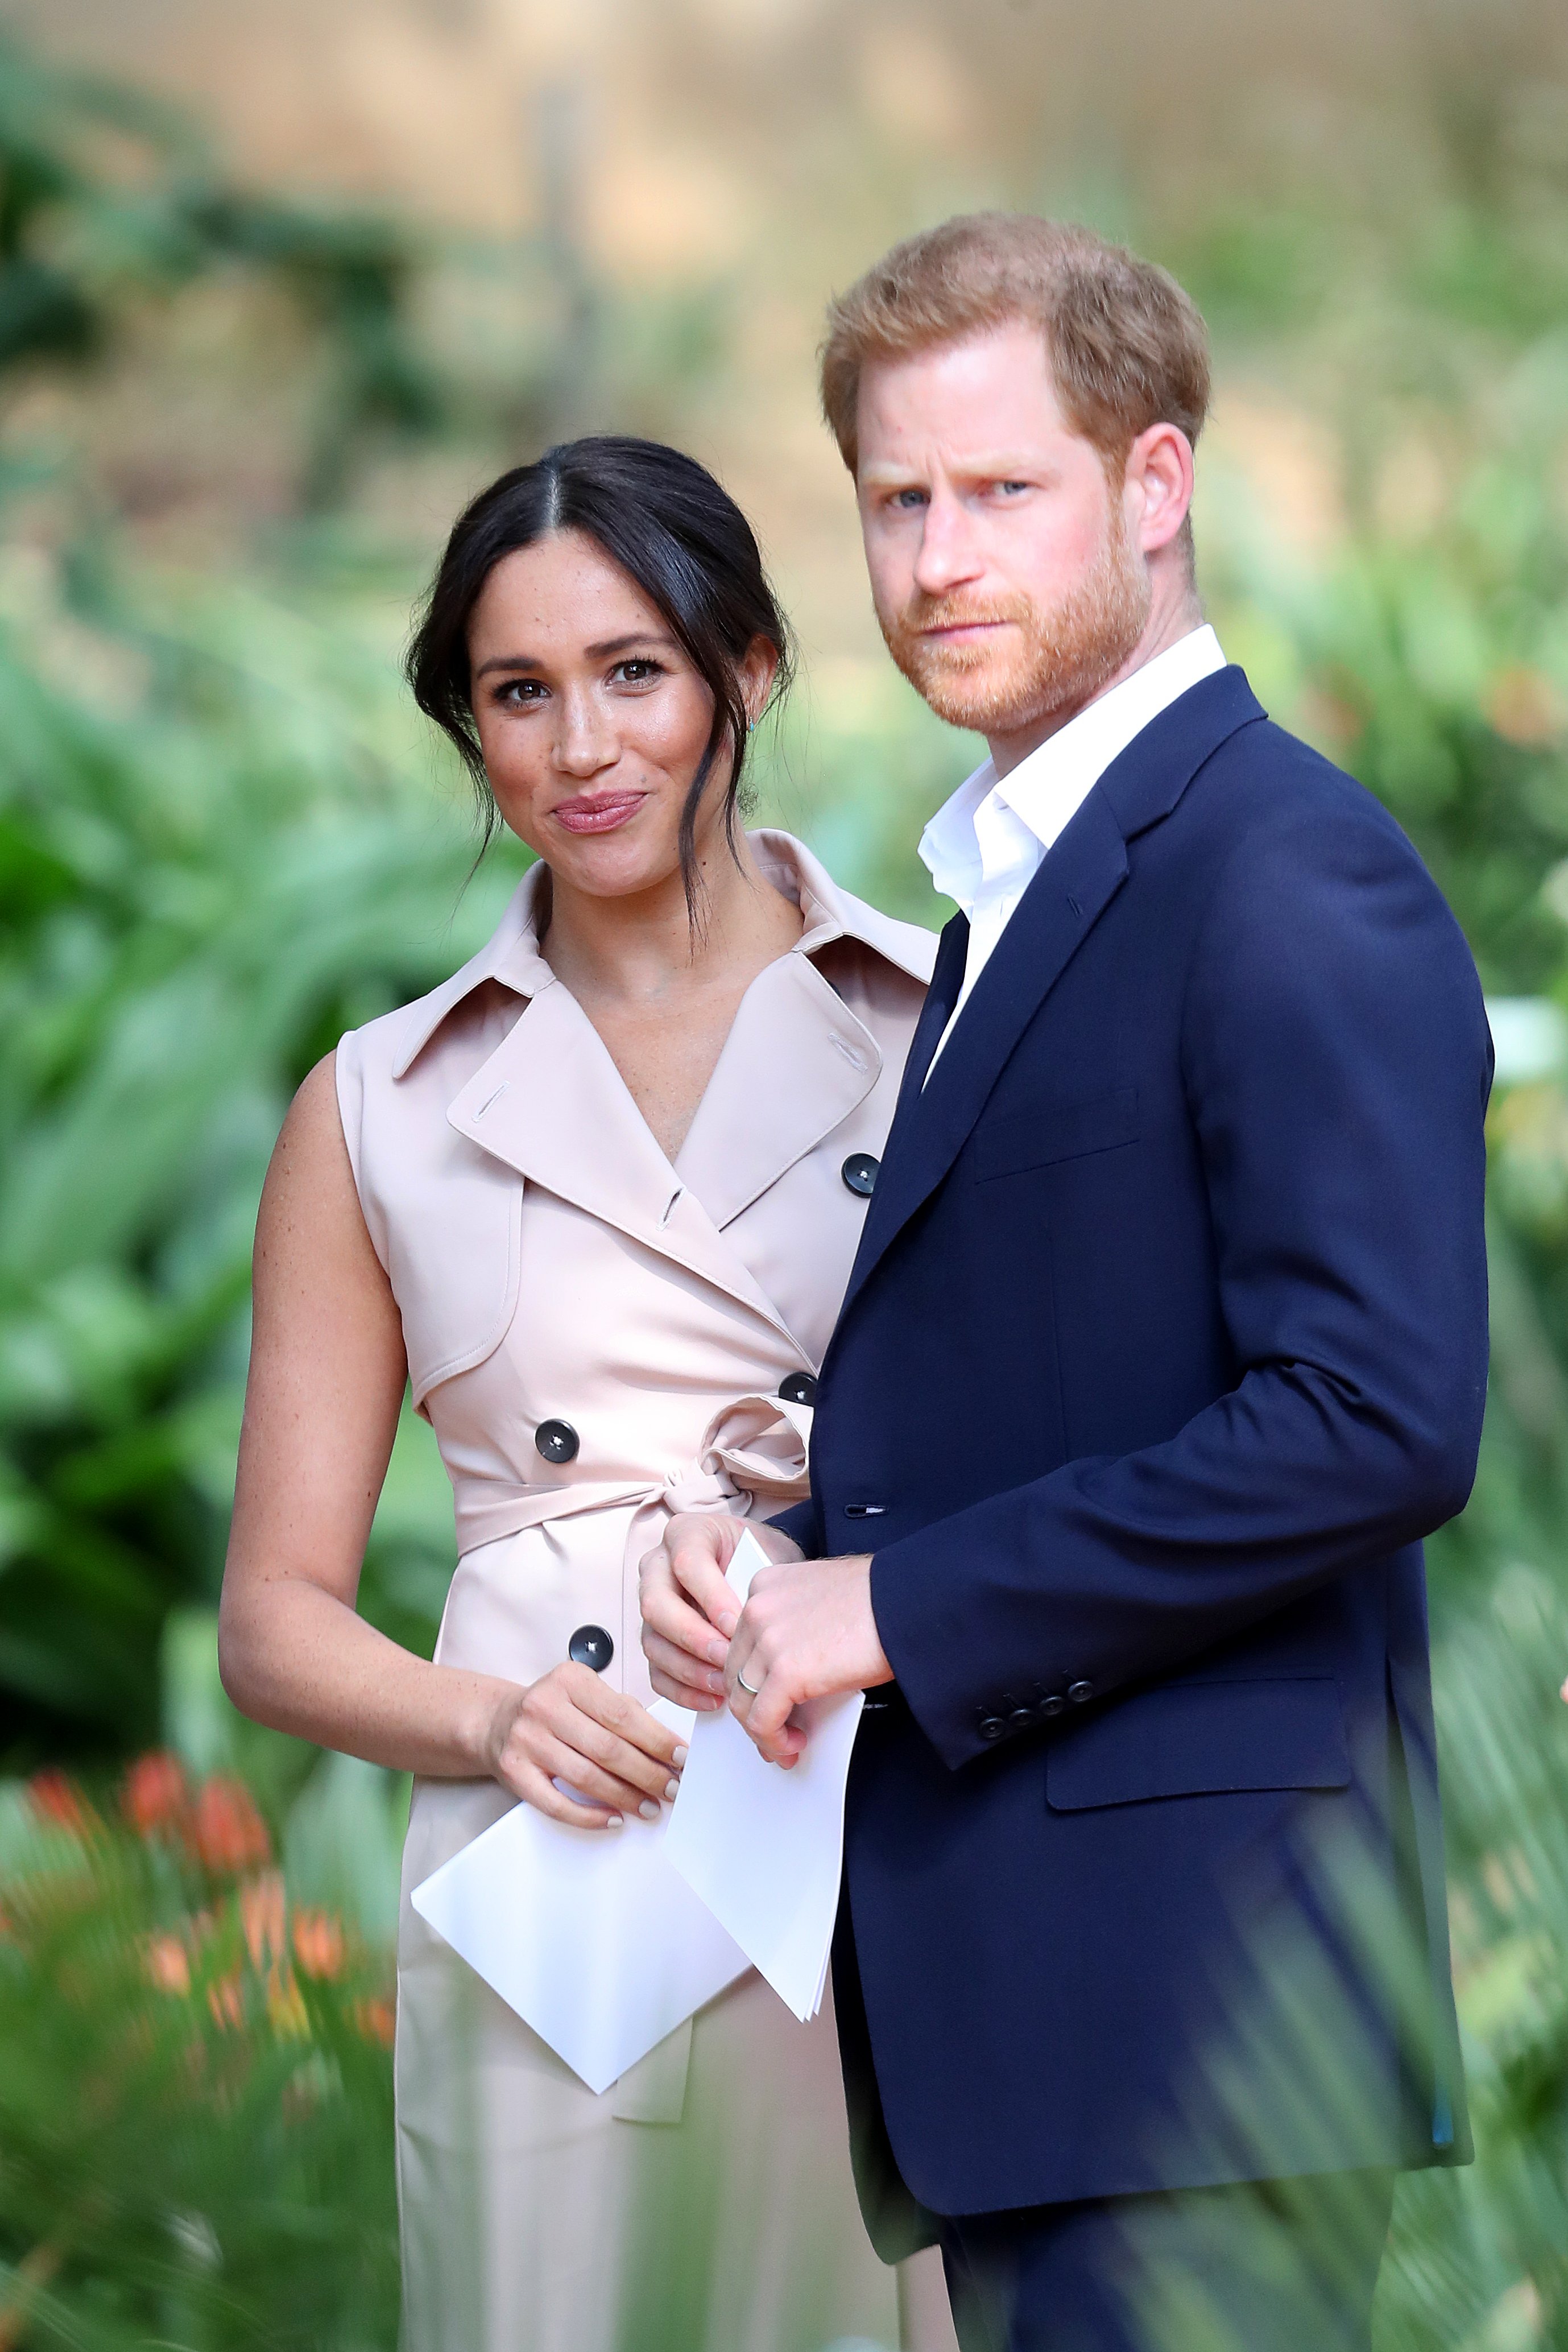 Prince Harry and Meghan Markle attend a Creative Industries and Business Reception on October 02, 2019, in Johannesburg, South Africa. | Source: Getty Images.